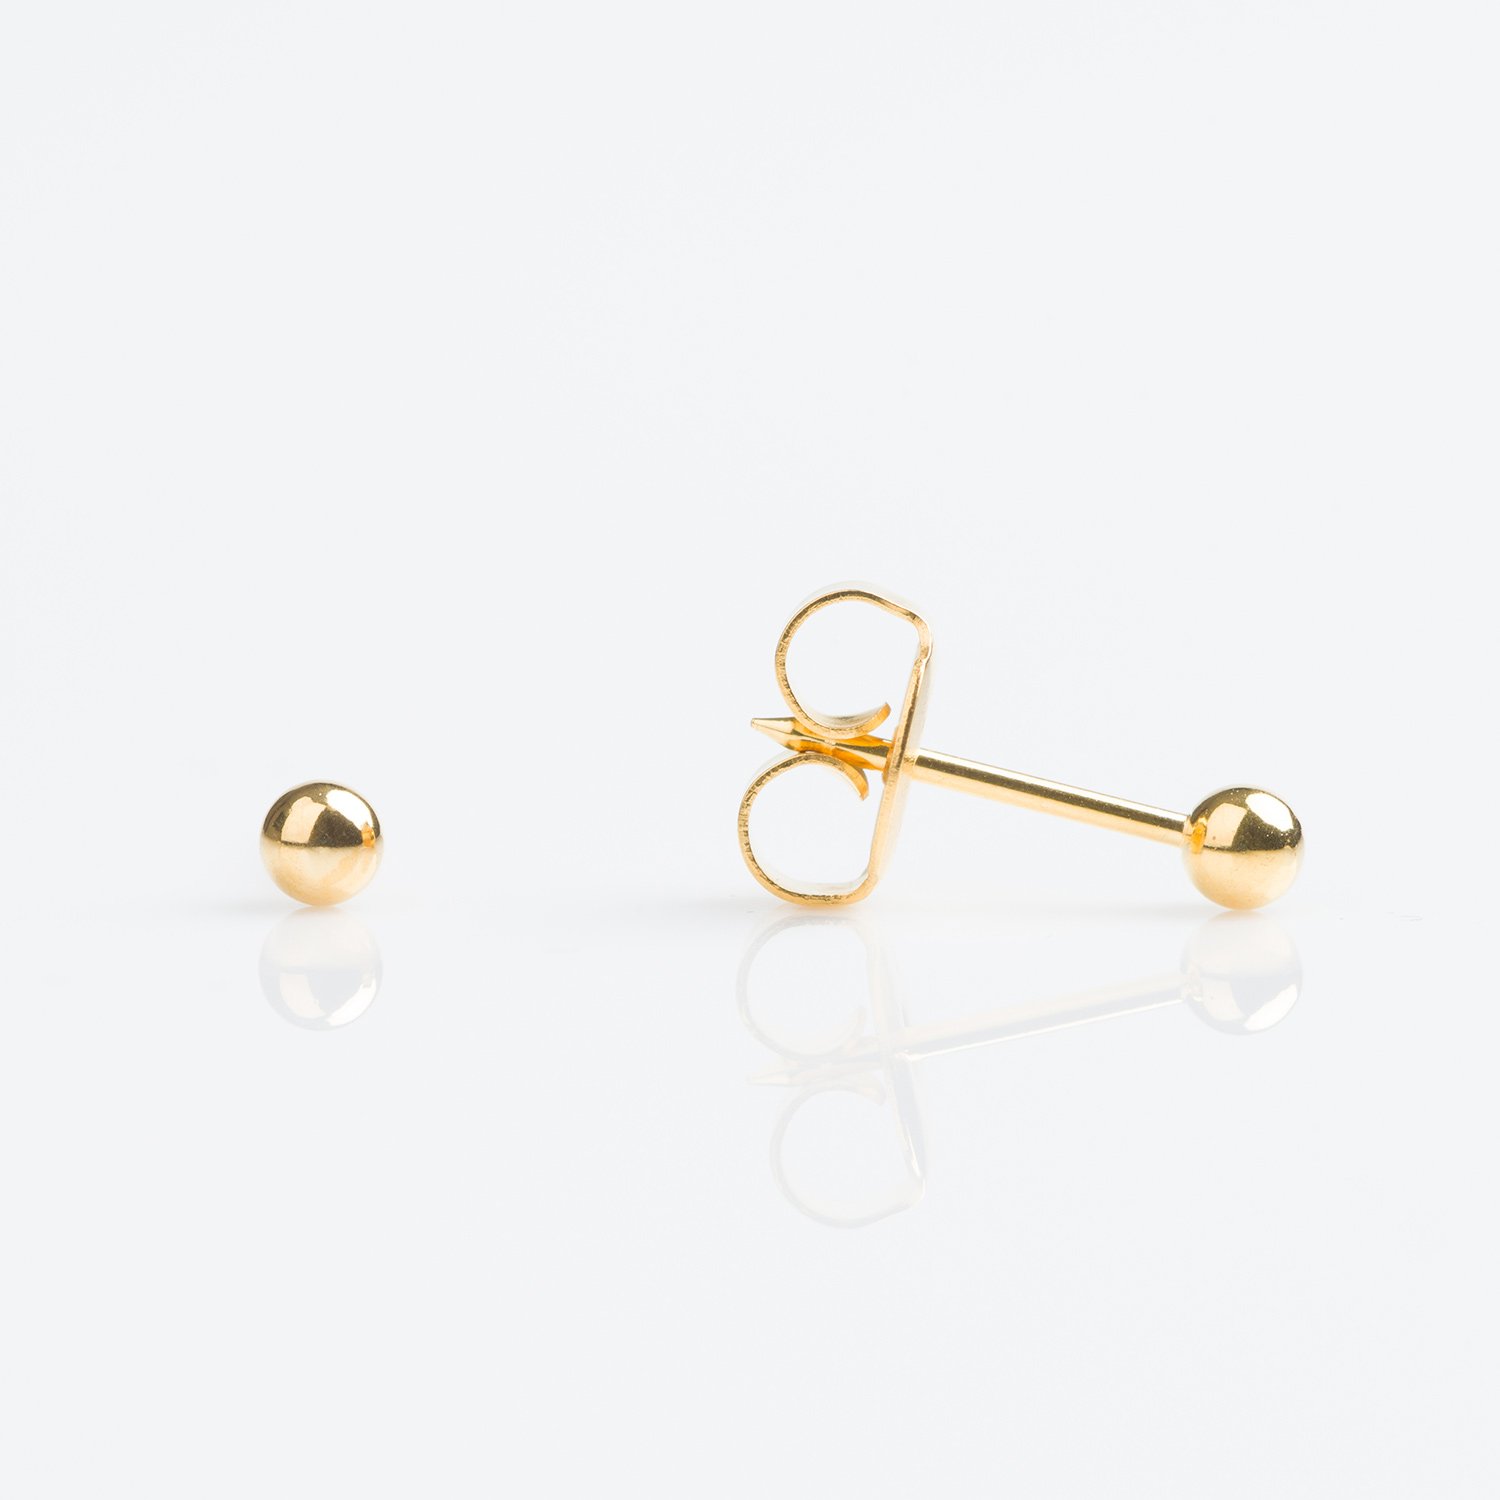 S621STX – Studex Sensitive Gold Plated 3mm Ball Earrings